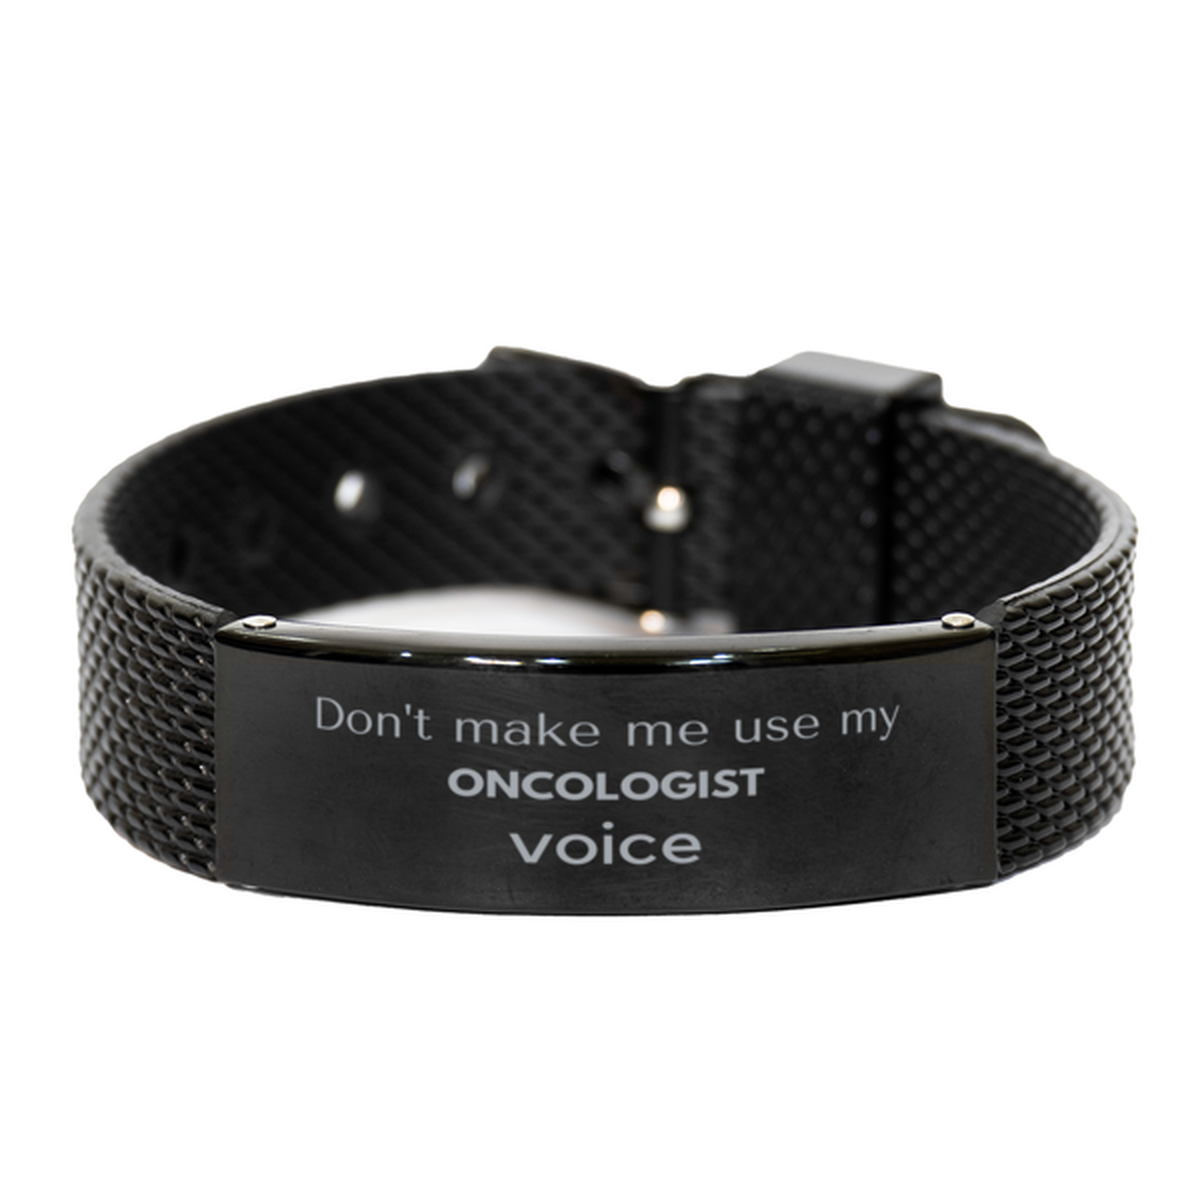 Don't make me use my Oncologist voice, Sarcasm Oncologist Gifts, Christmas Oncologist Black Shark Mesh Bracelet Birthday Unique Gifts For Oncologist Coworkers, Men, Women, Colleague, Friends